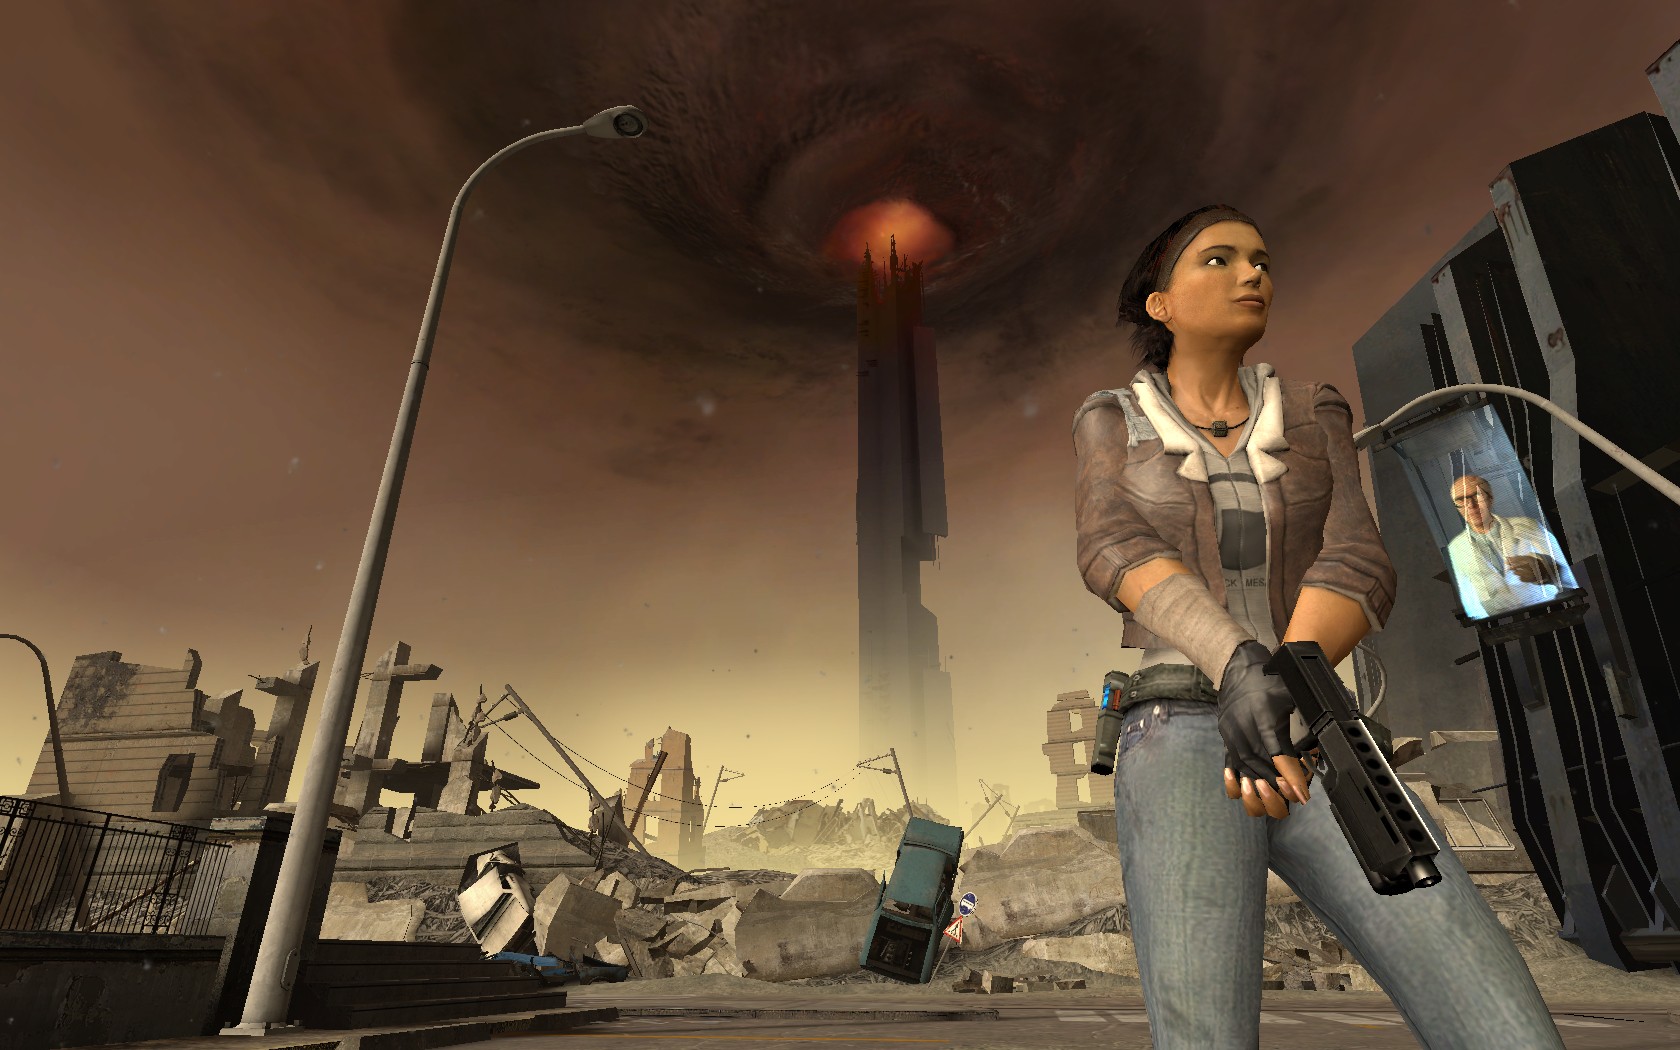 Half-Life Series Free To Play Ahead Of Half-Life: Alyx Release - GameSpot